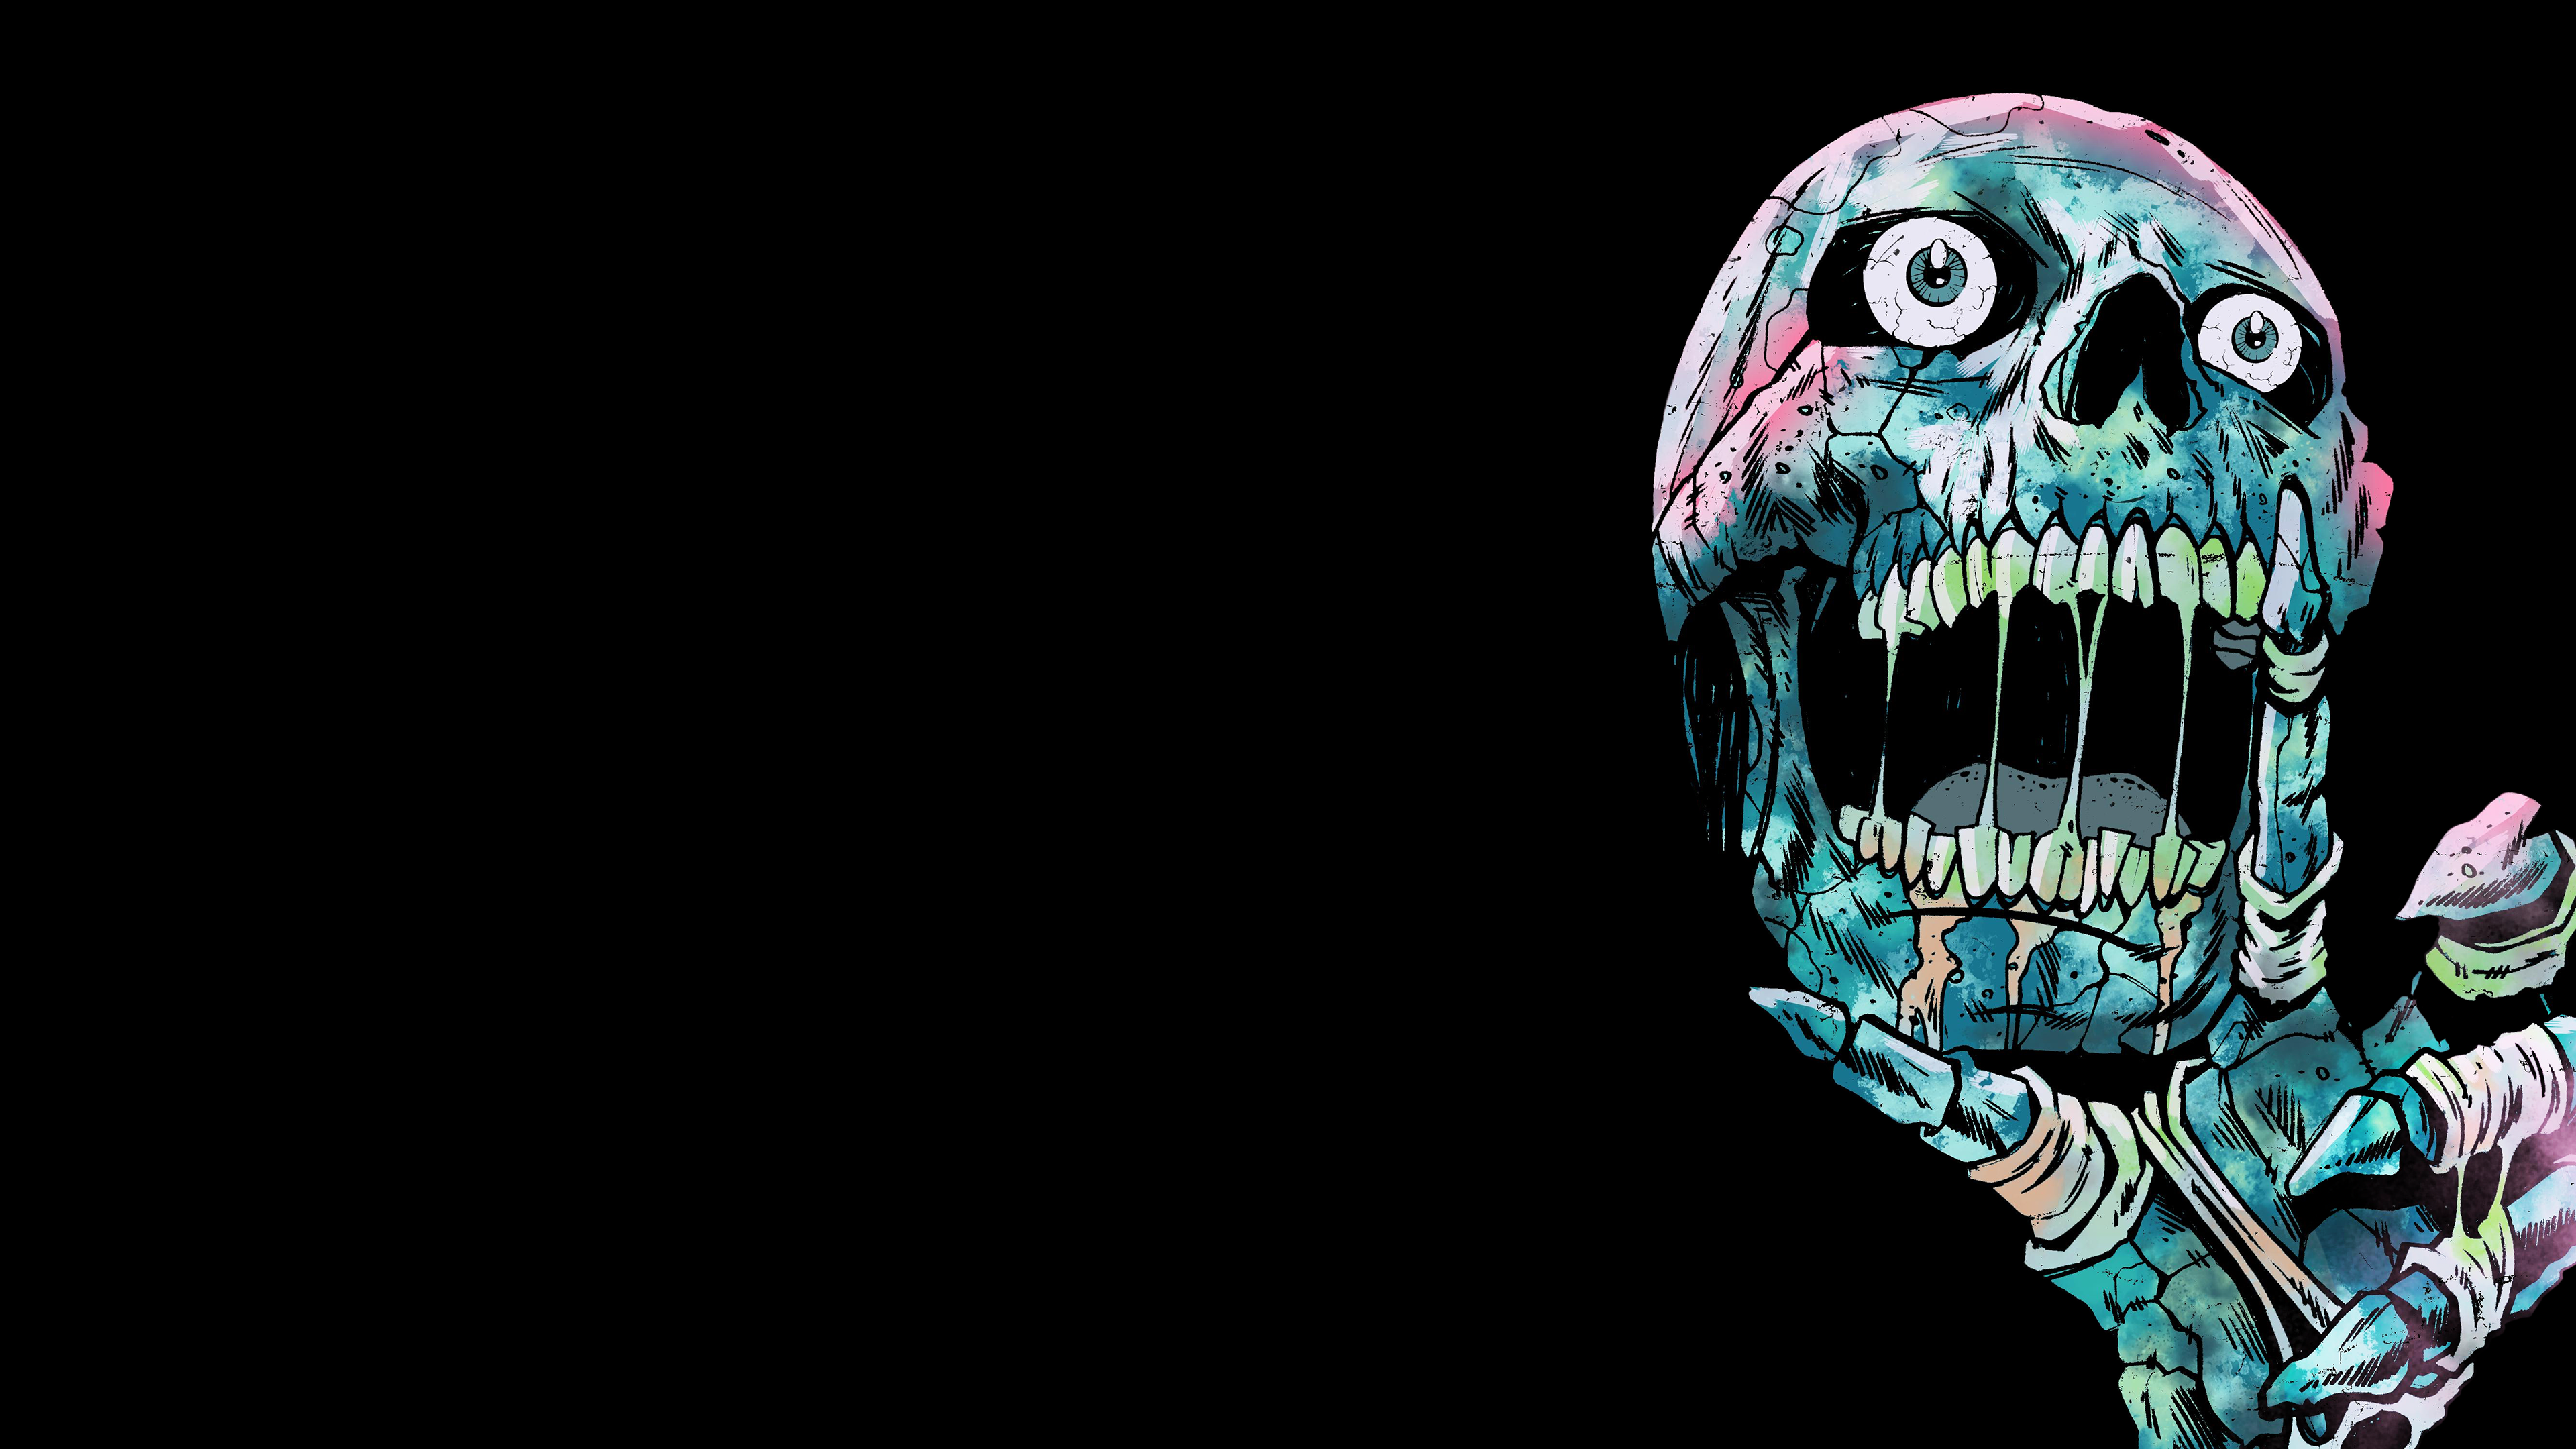 General 3840x2160 Dance With The Dead skull skeleton synthwave darksynth turquoise